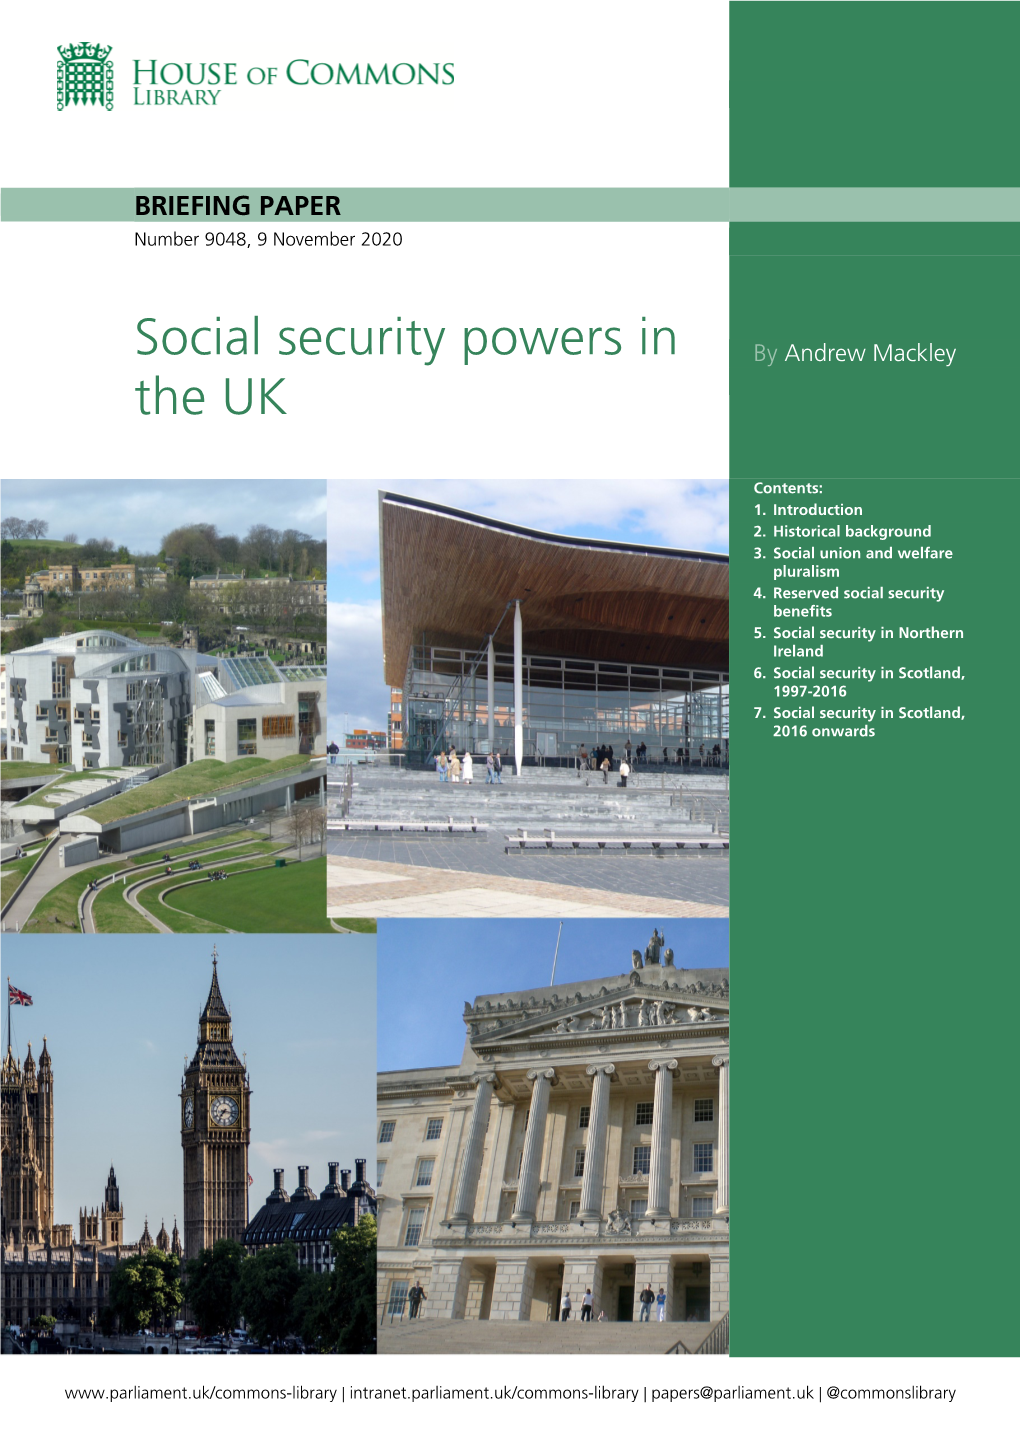 Social Security Powers in the UK